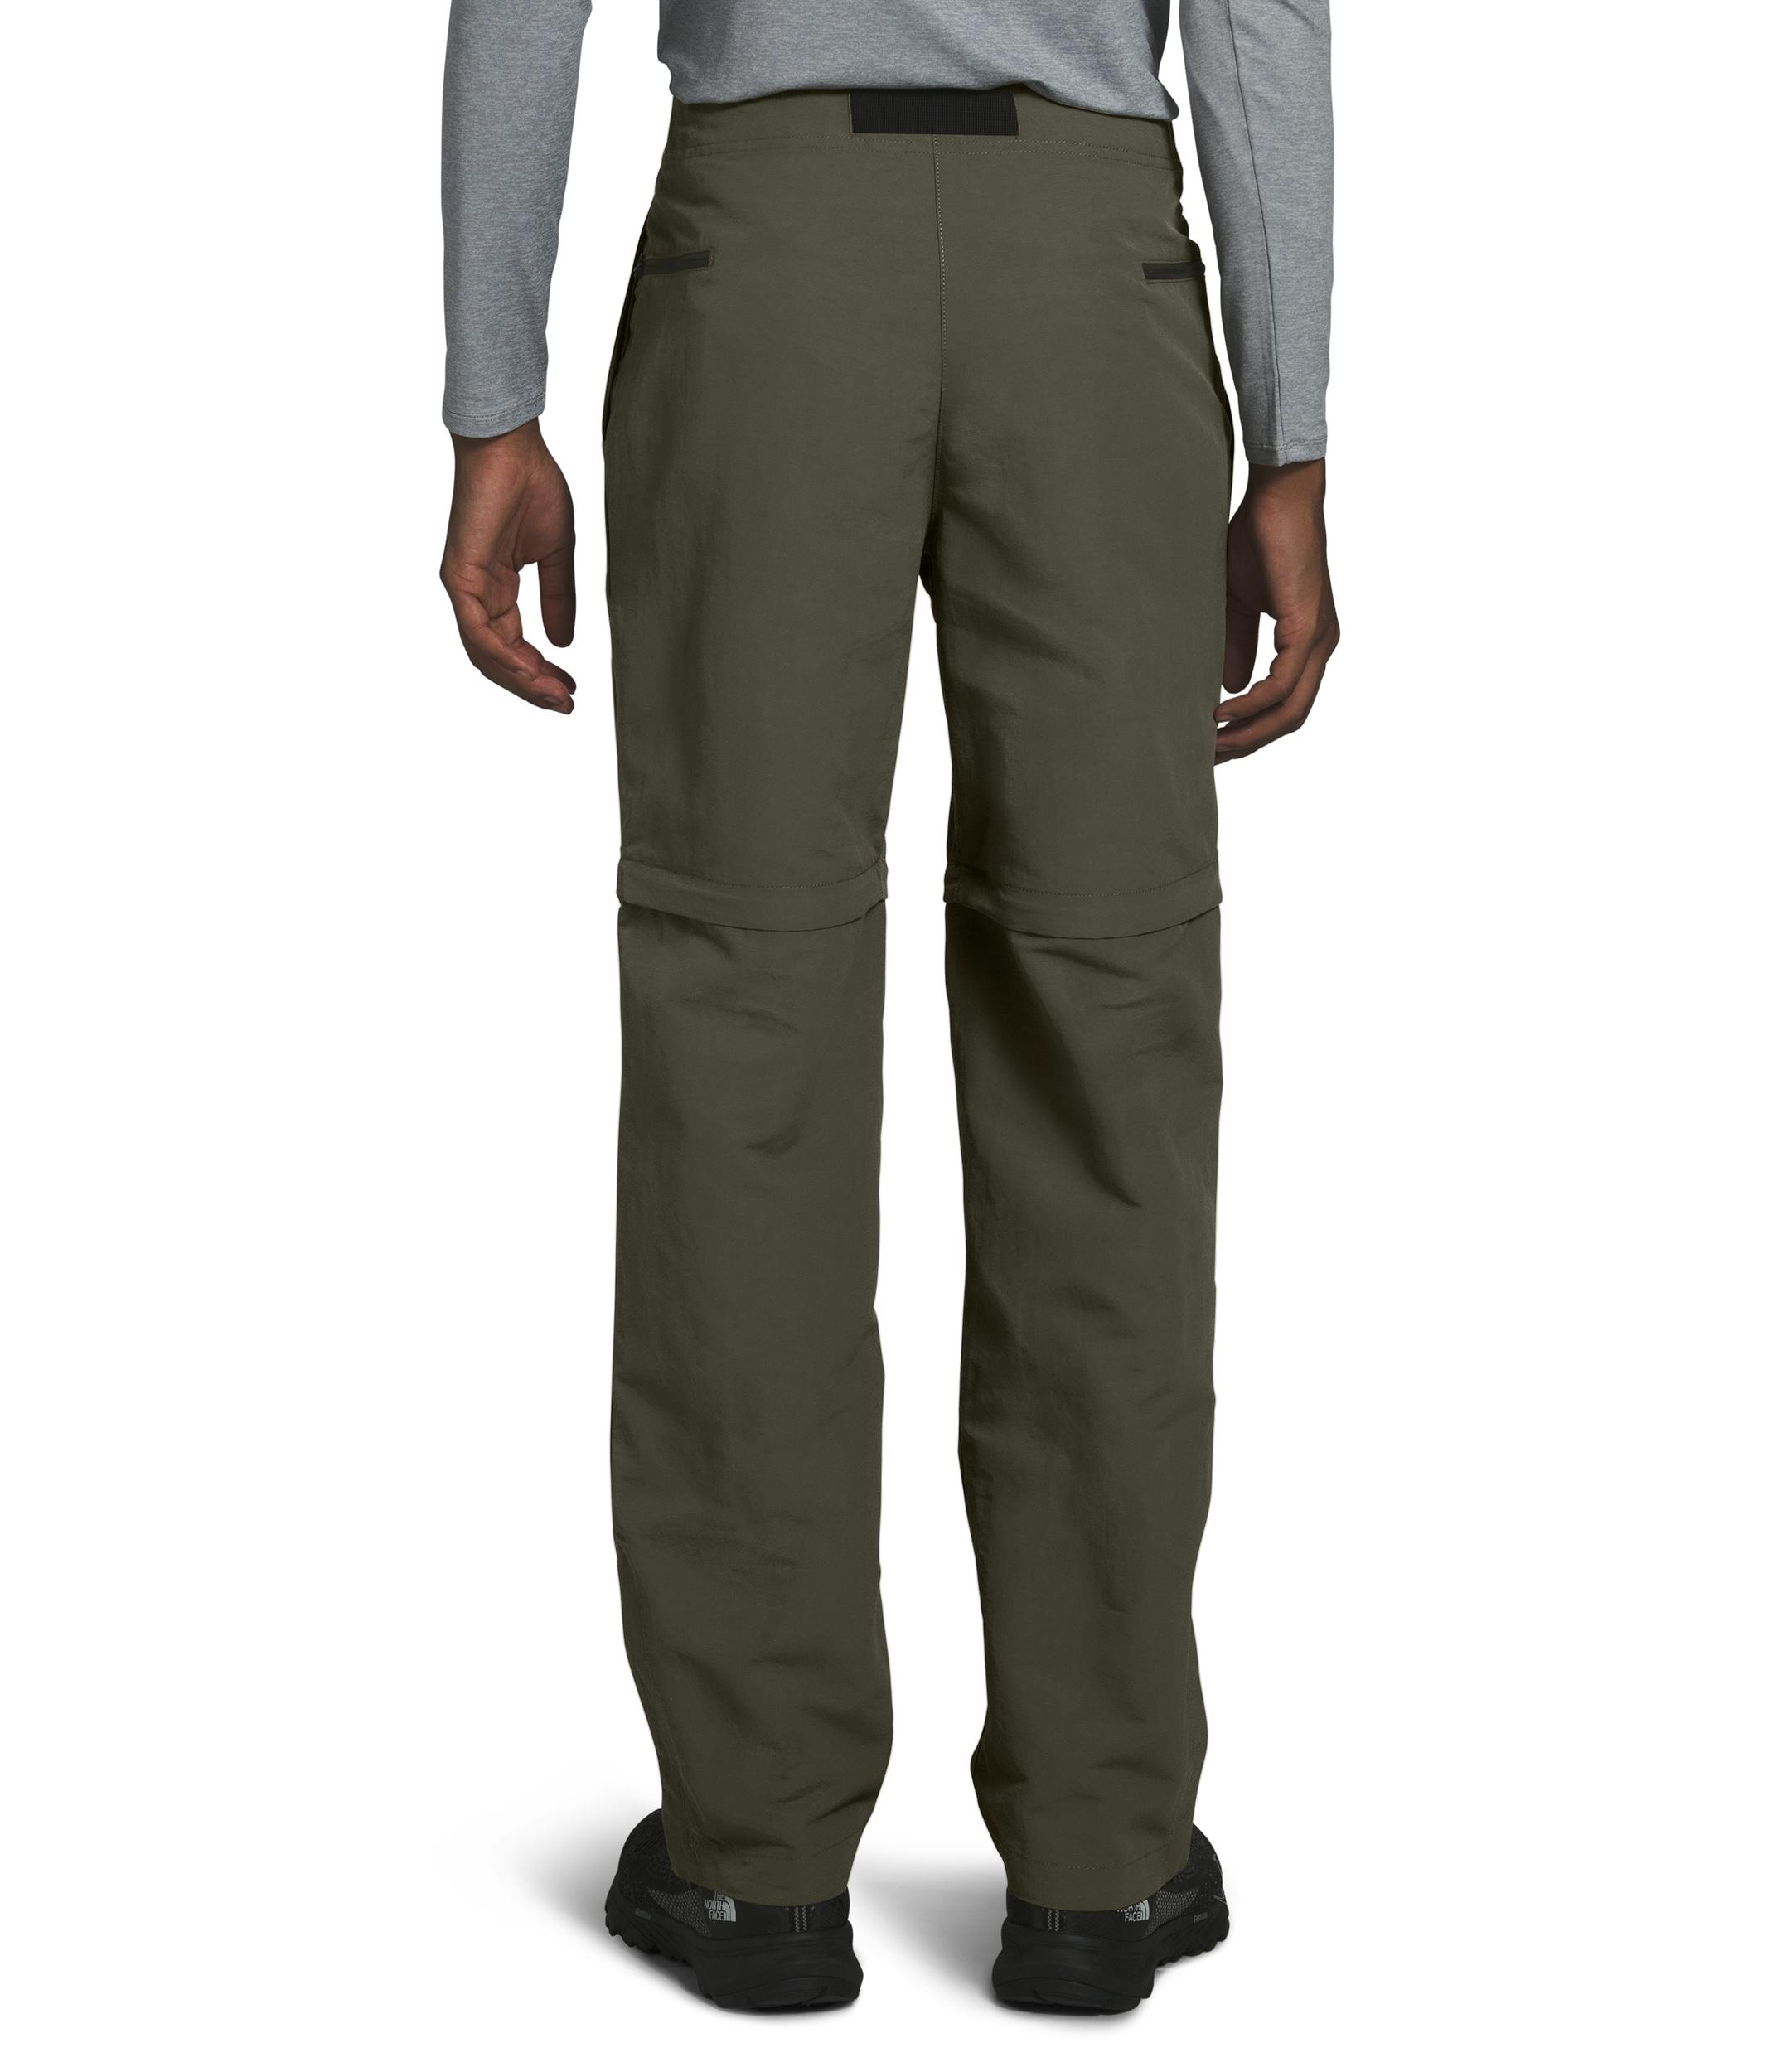 THE NORTH FACE Paramount Convertible Mid-Rise Pant - Women's (Closeout)